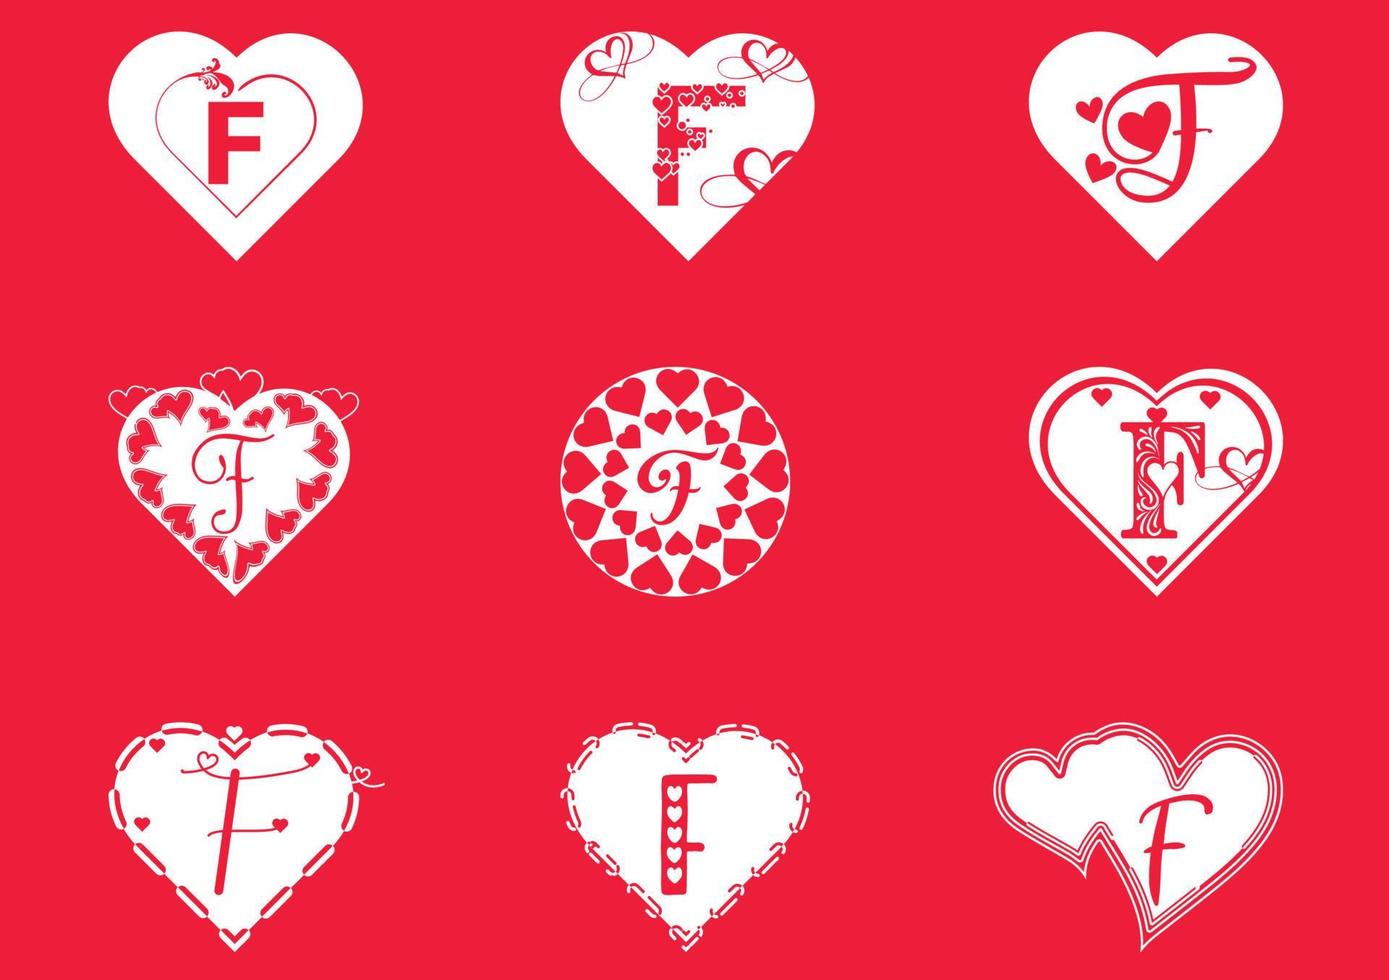 F letter logo with love icon, valentines day design template vector